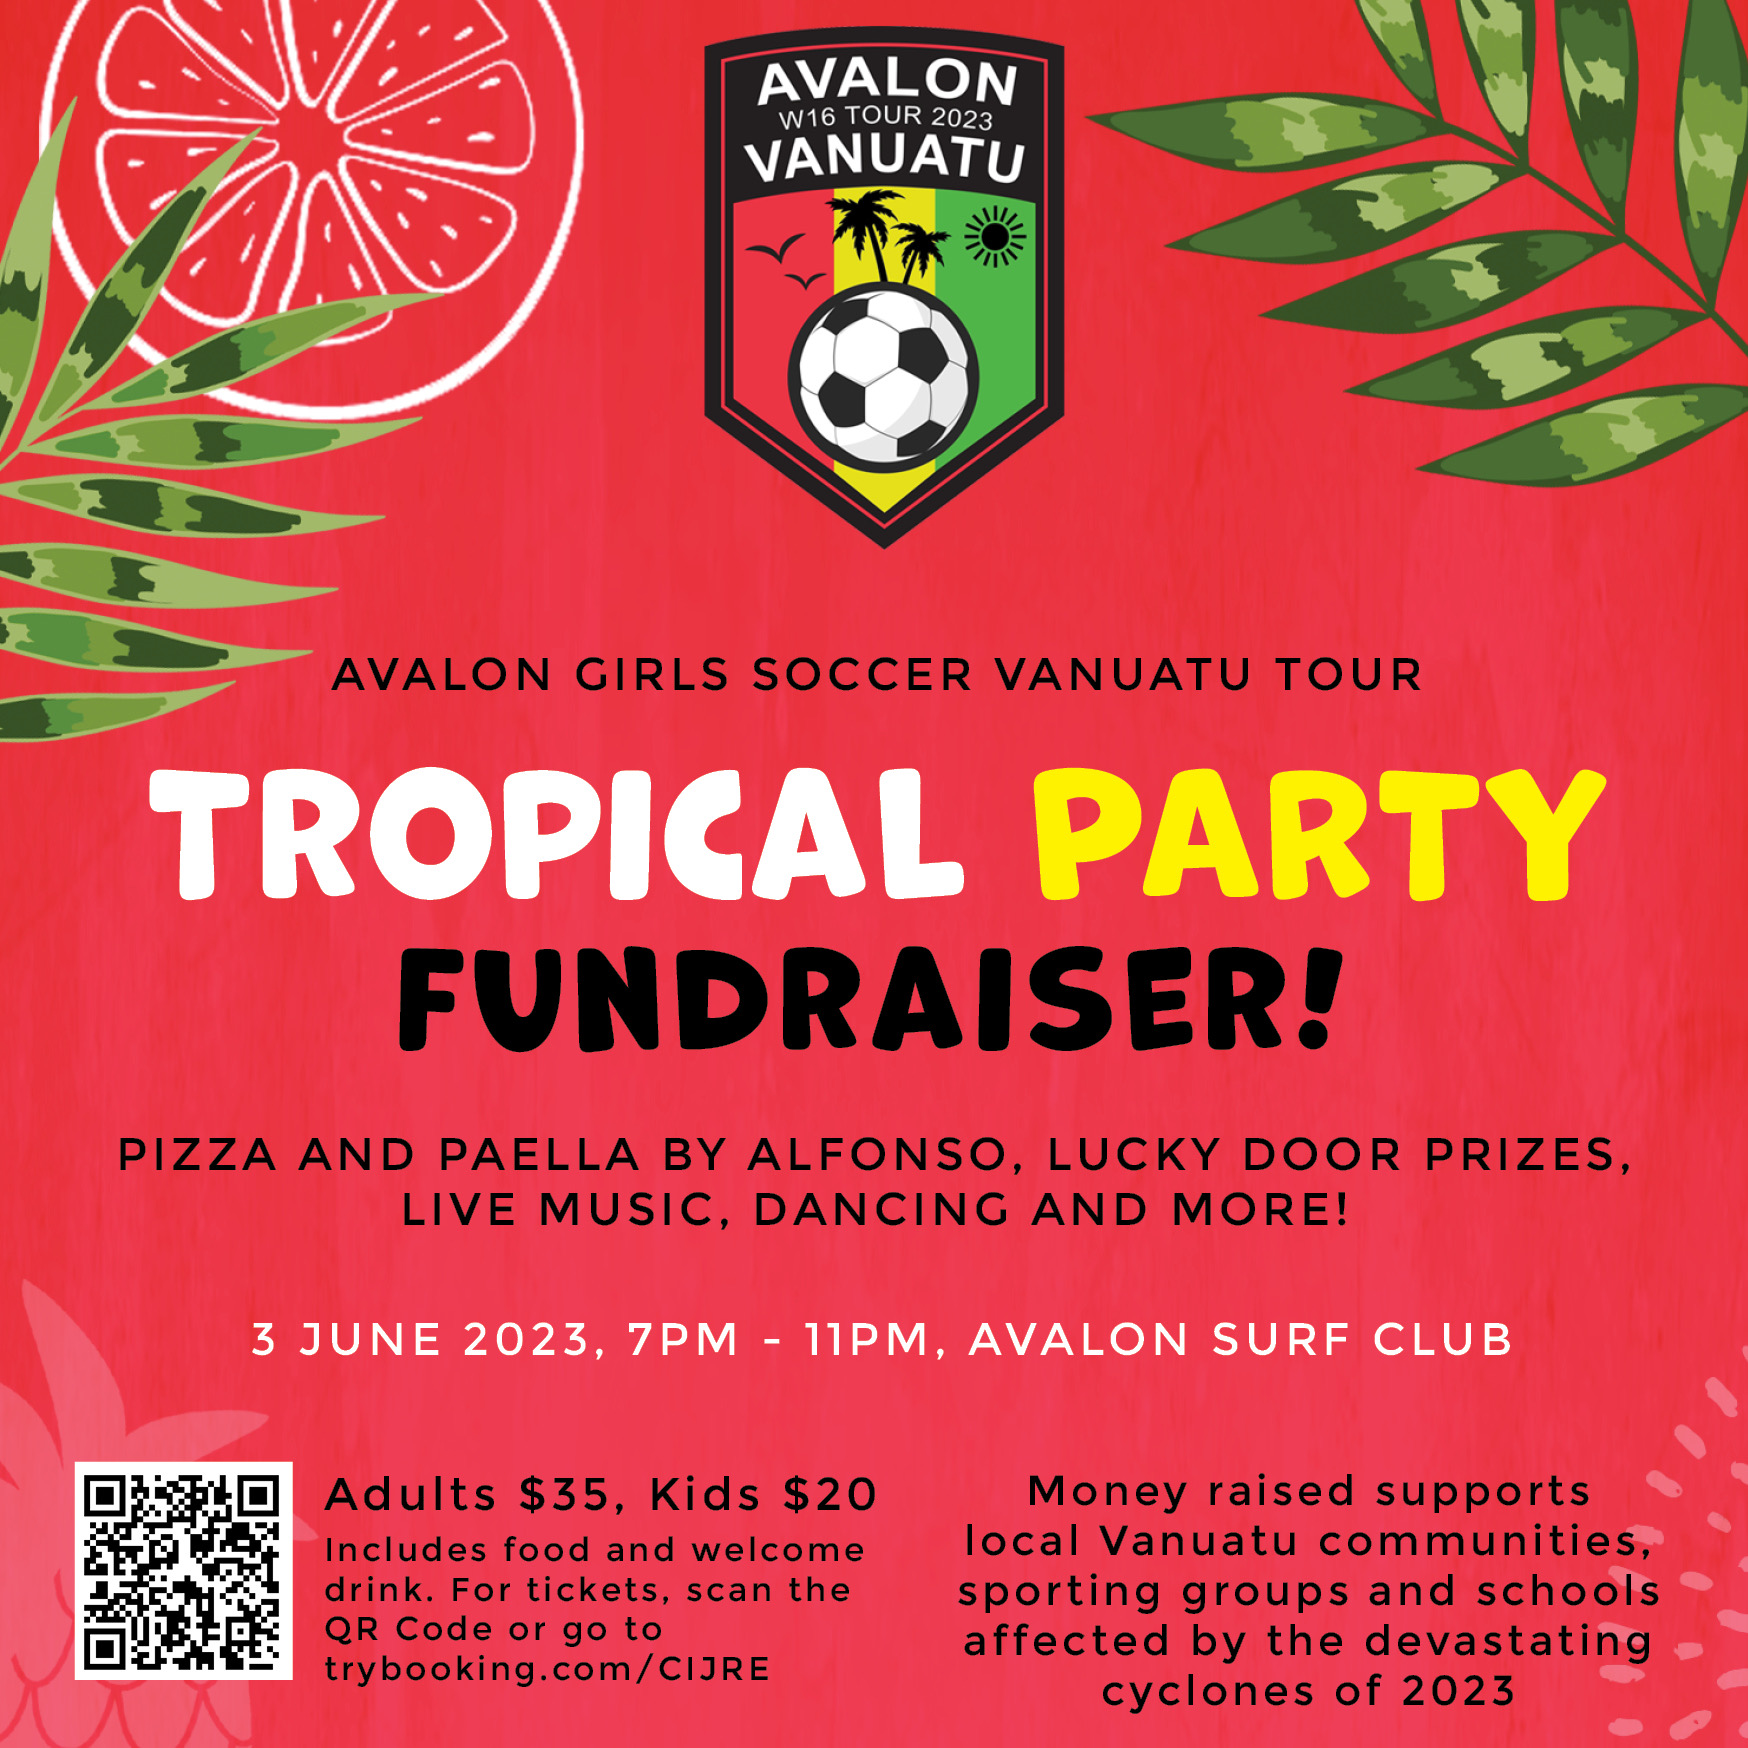 On Saturday June 3rd, there will be an Avalon fundraising night for their W16 team, who are touring Vanuatu to highlight local women's football, assist in the cyclone recovery effort and provide charitable donations. Graphic supplied by Avalon Soccer Club.